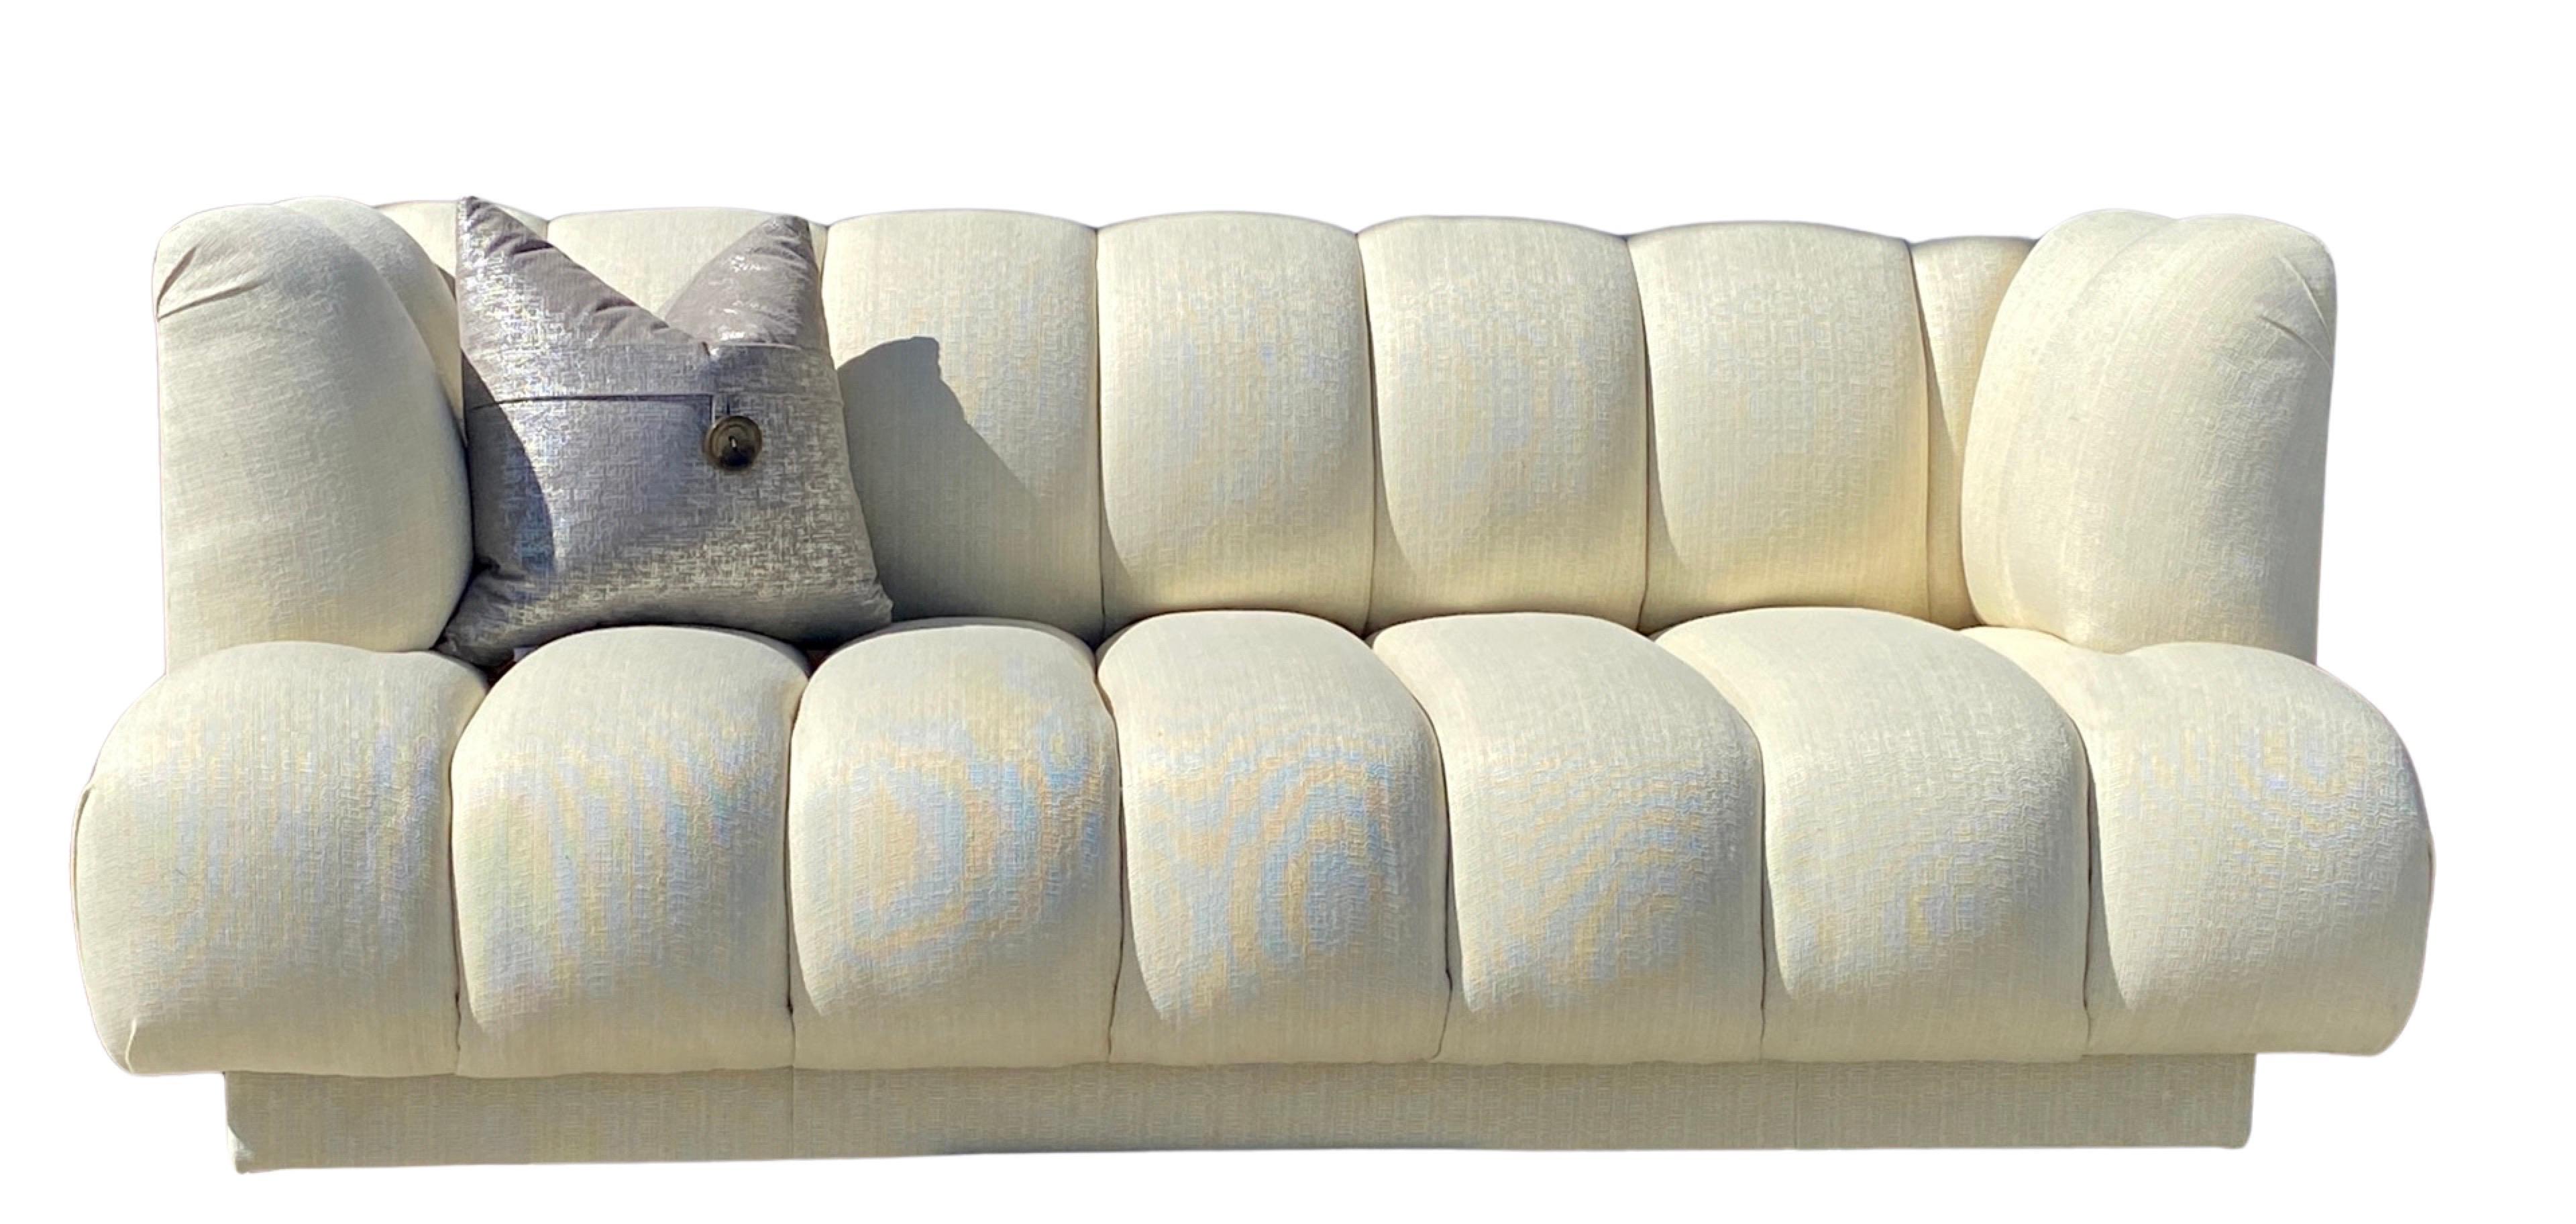 Modern Steve Chase Iconic Channel Sofa From Celebrity Estate in New Creme Upholstery  For Sale